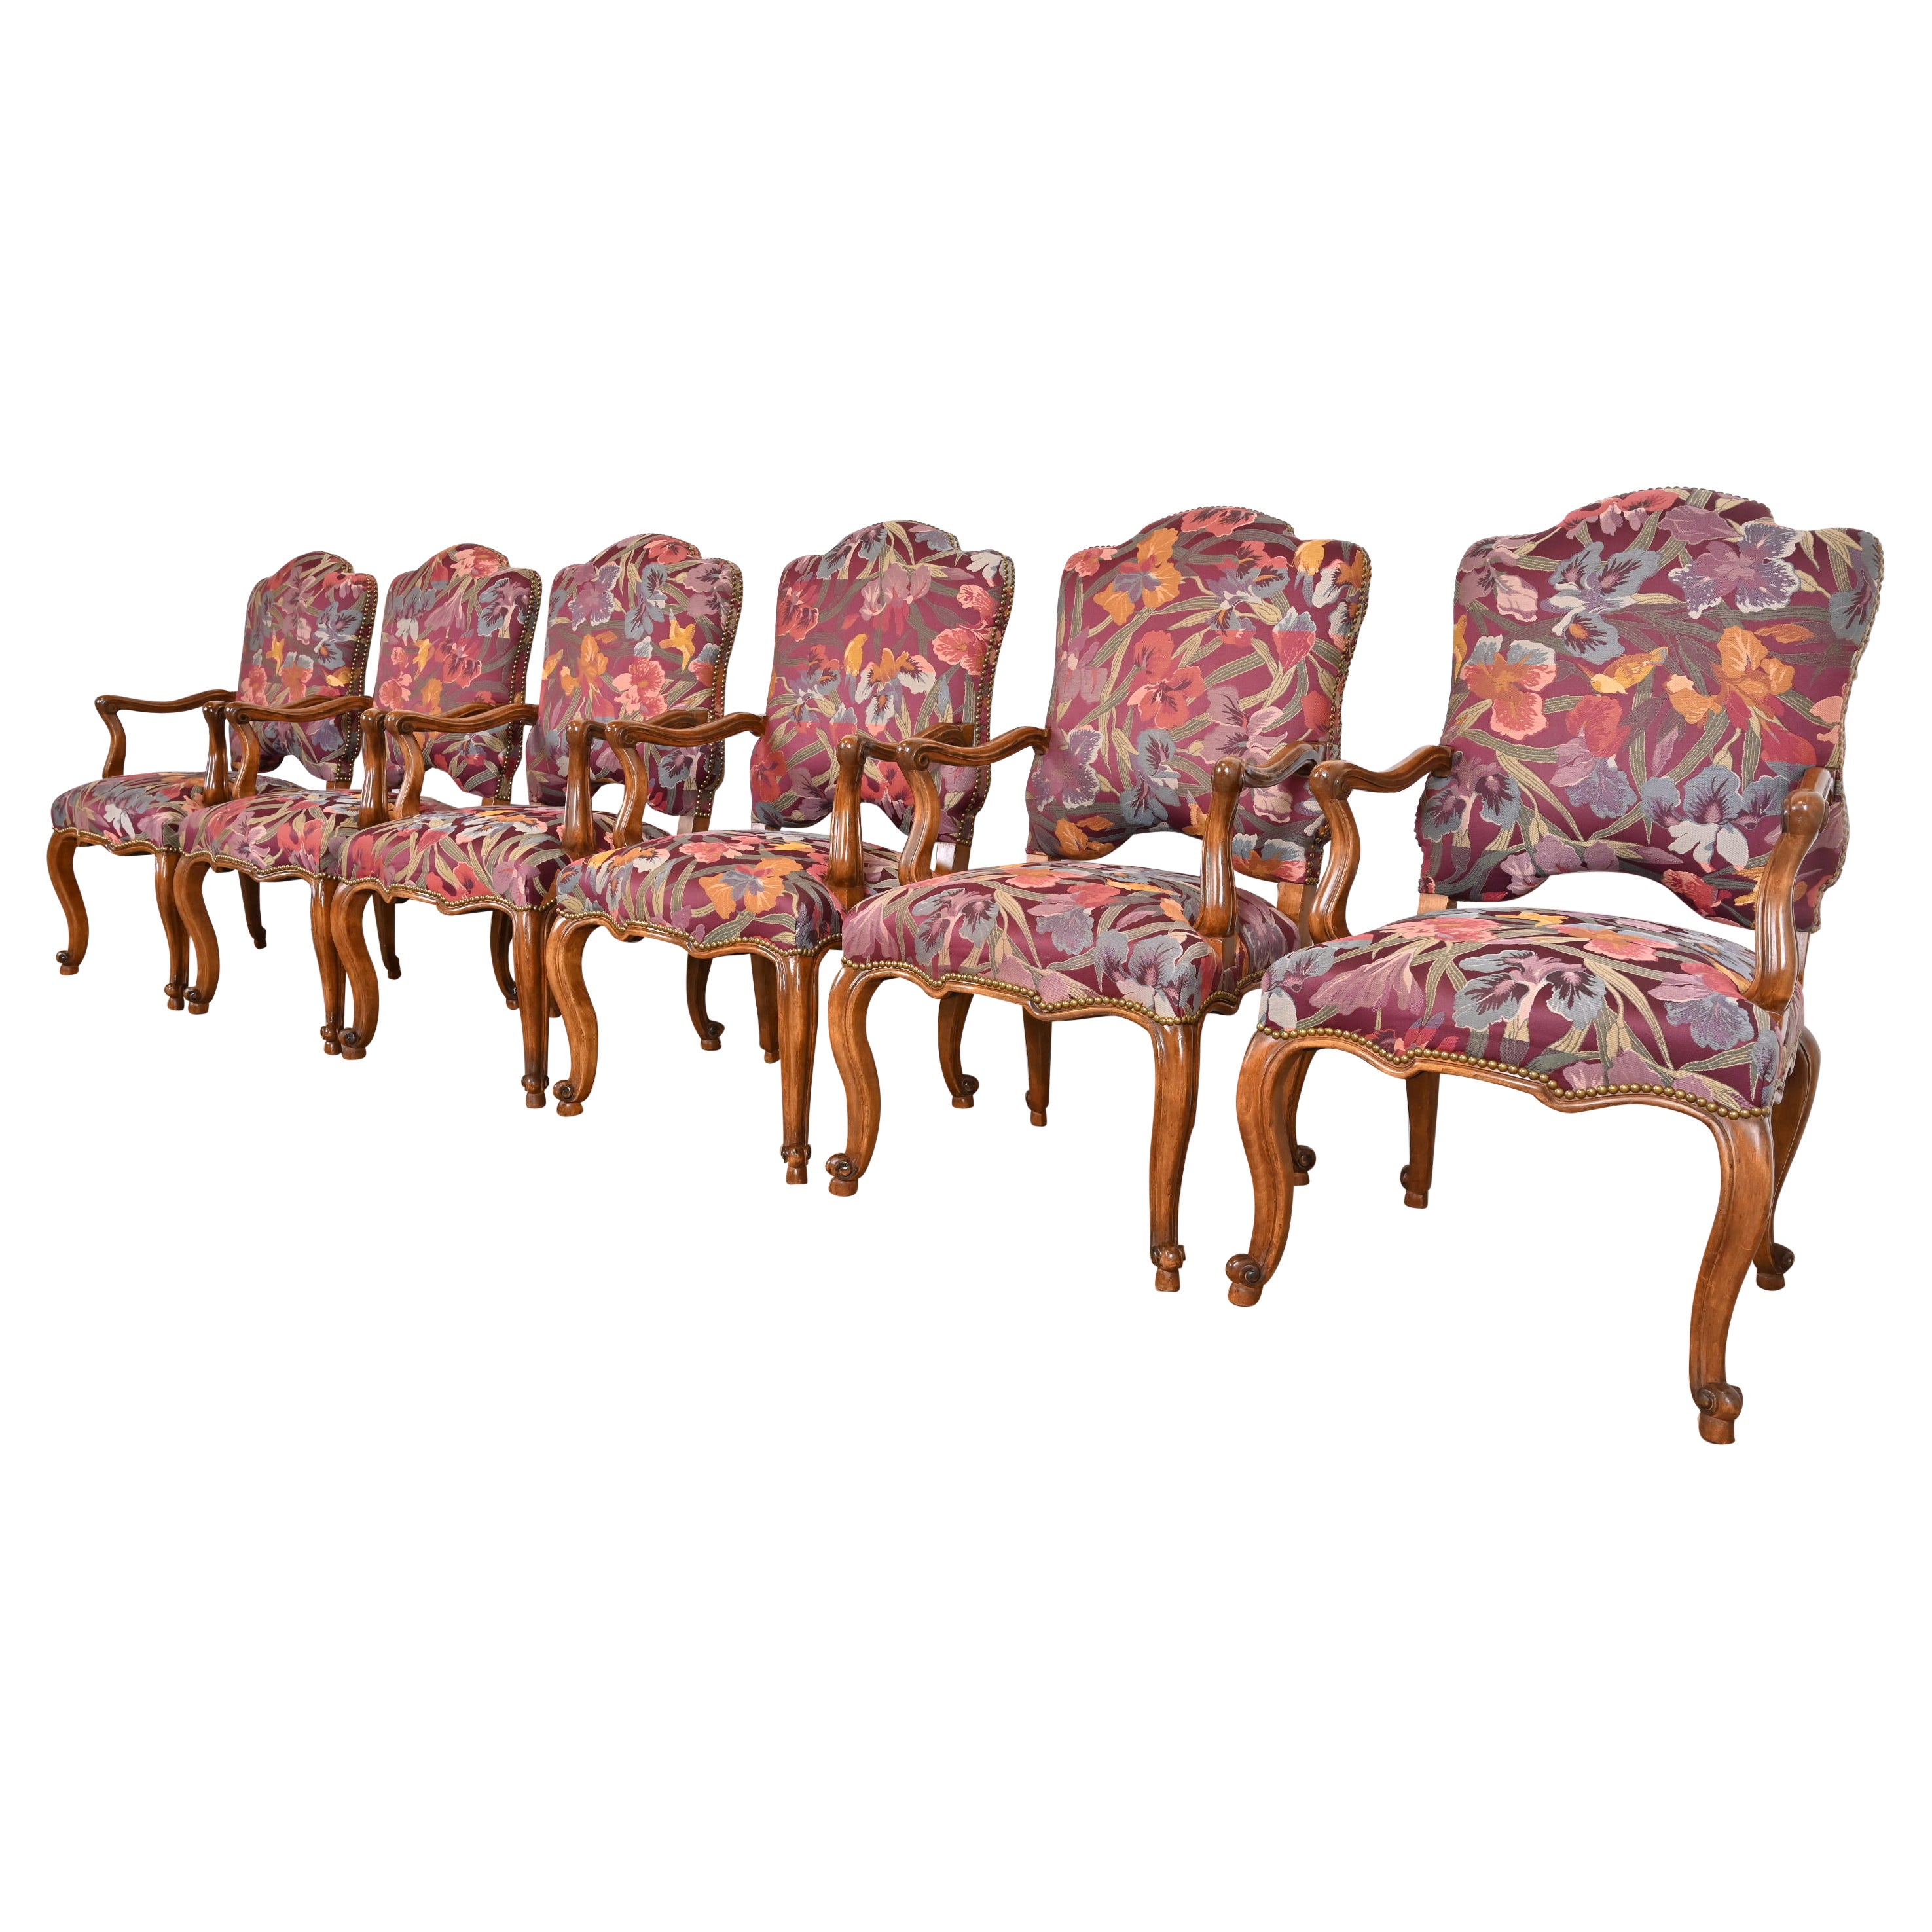 Minton-Spidell Armchairs